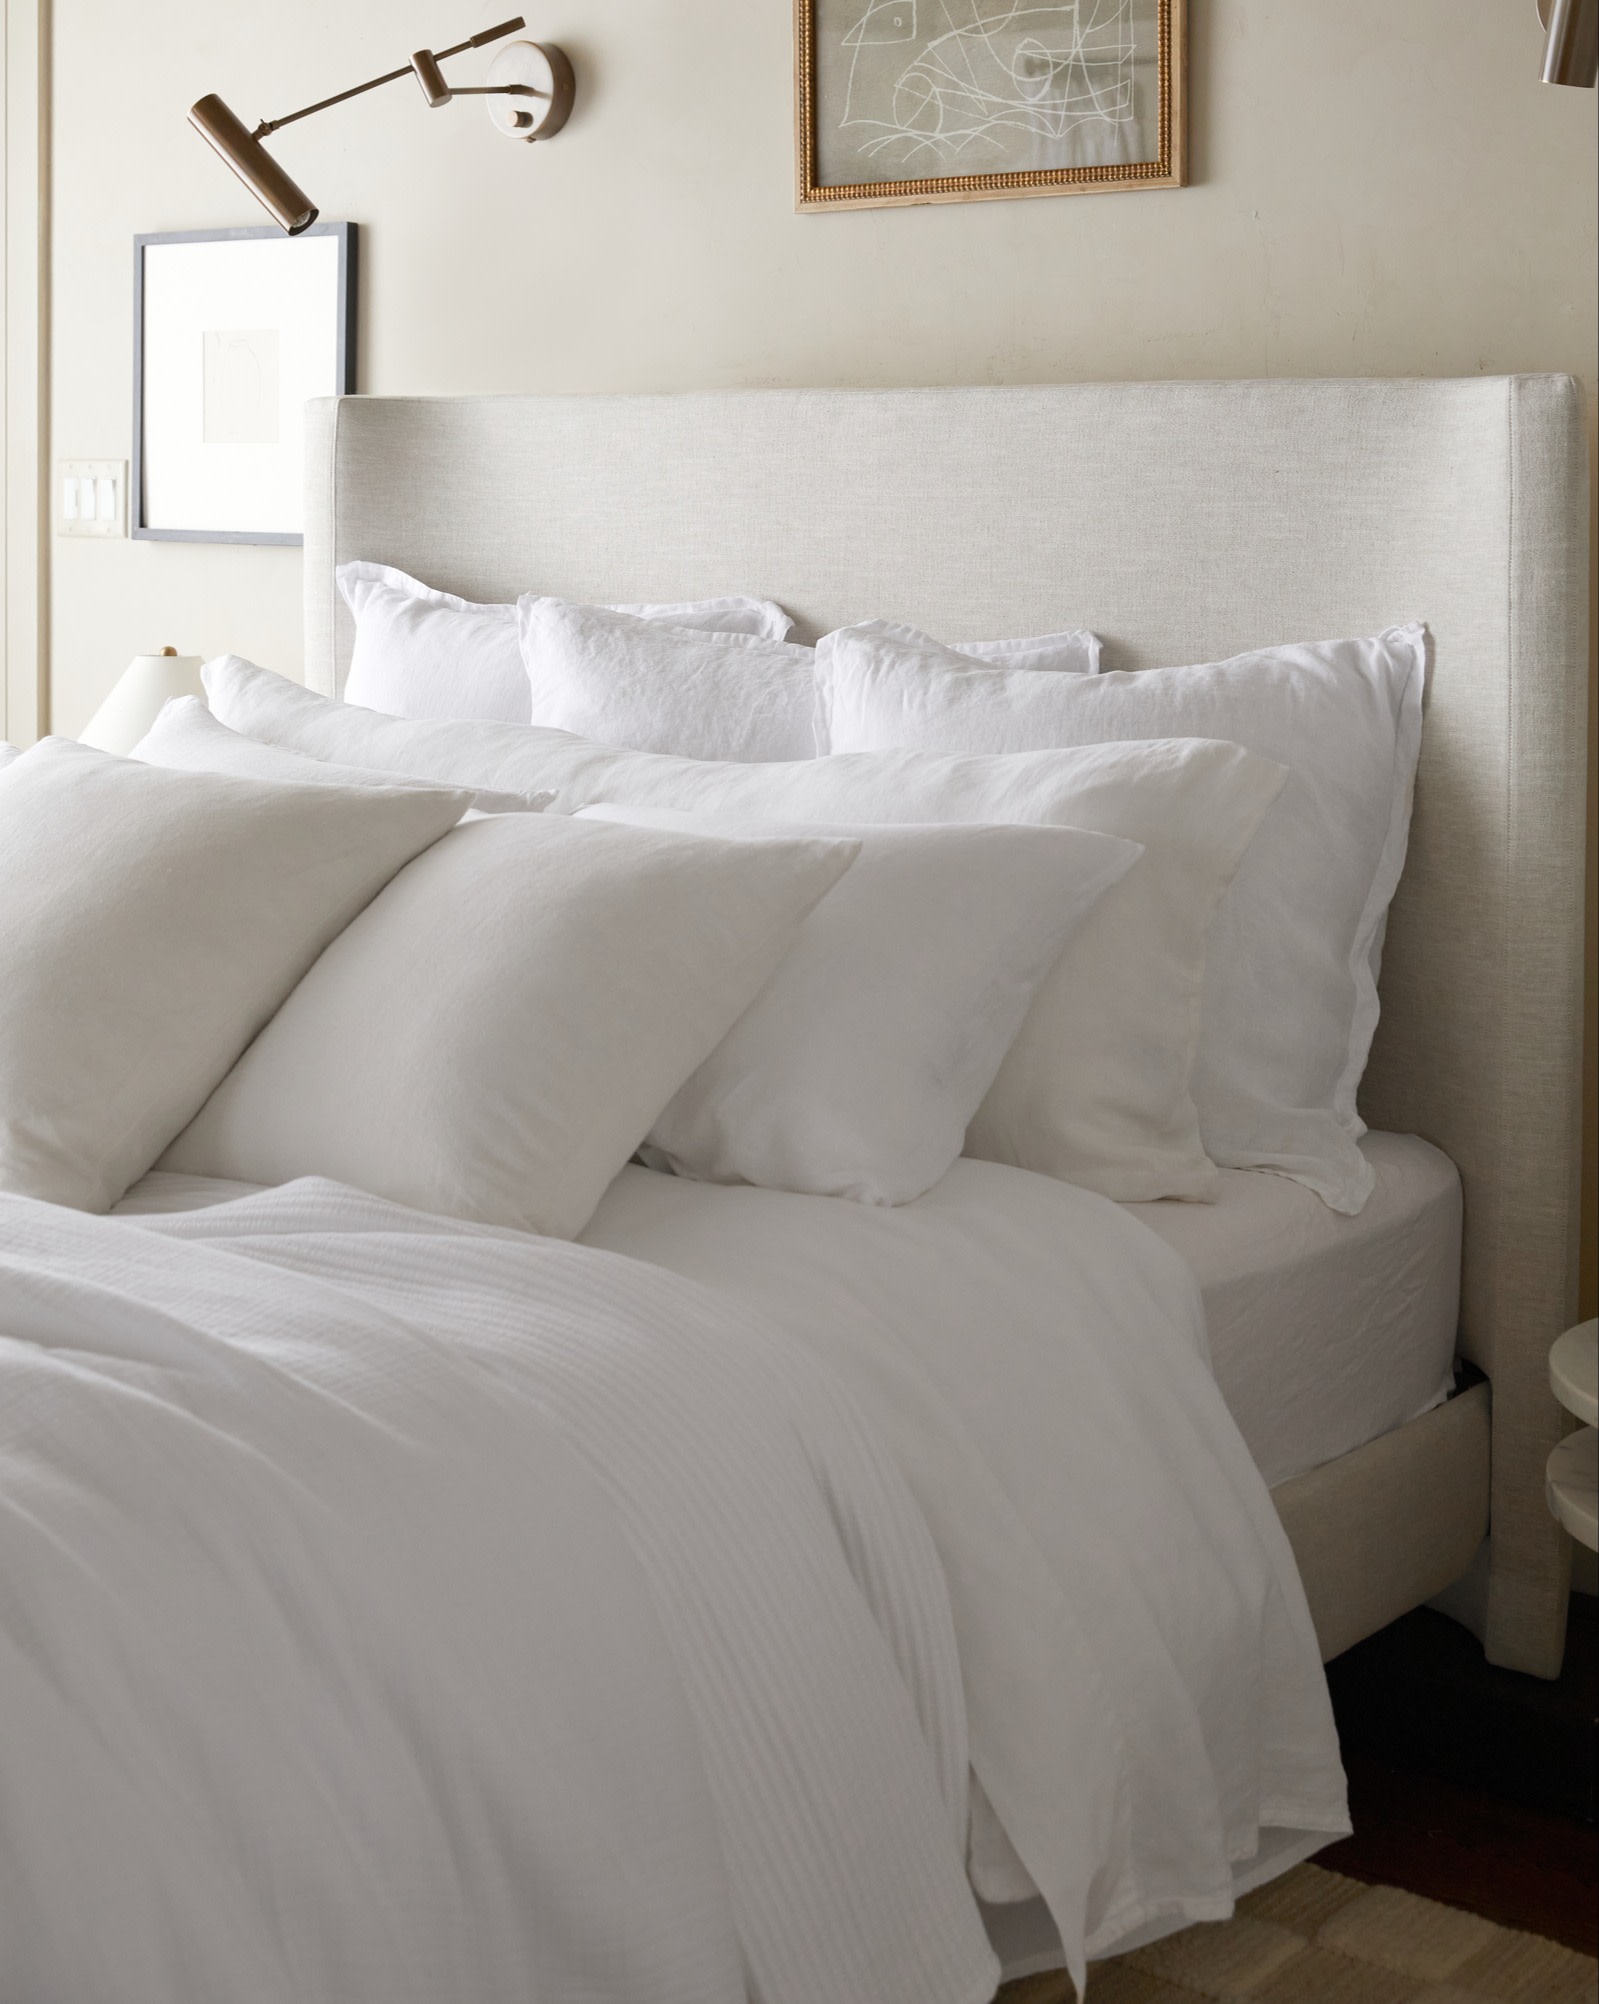 A neat bed with all white bedding and rows of plush pillows